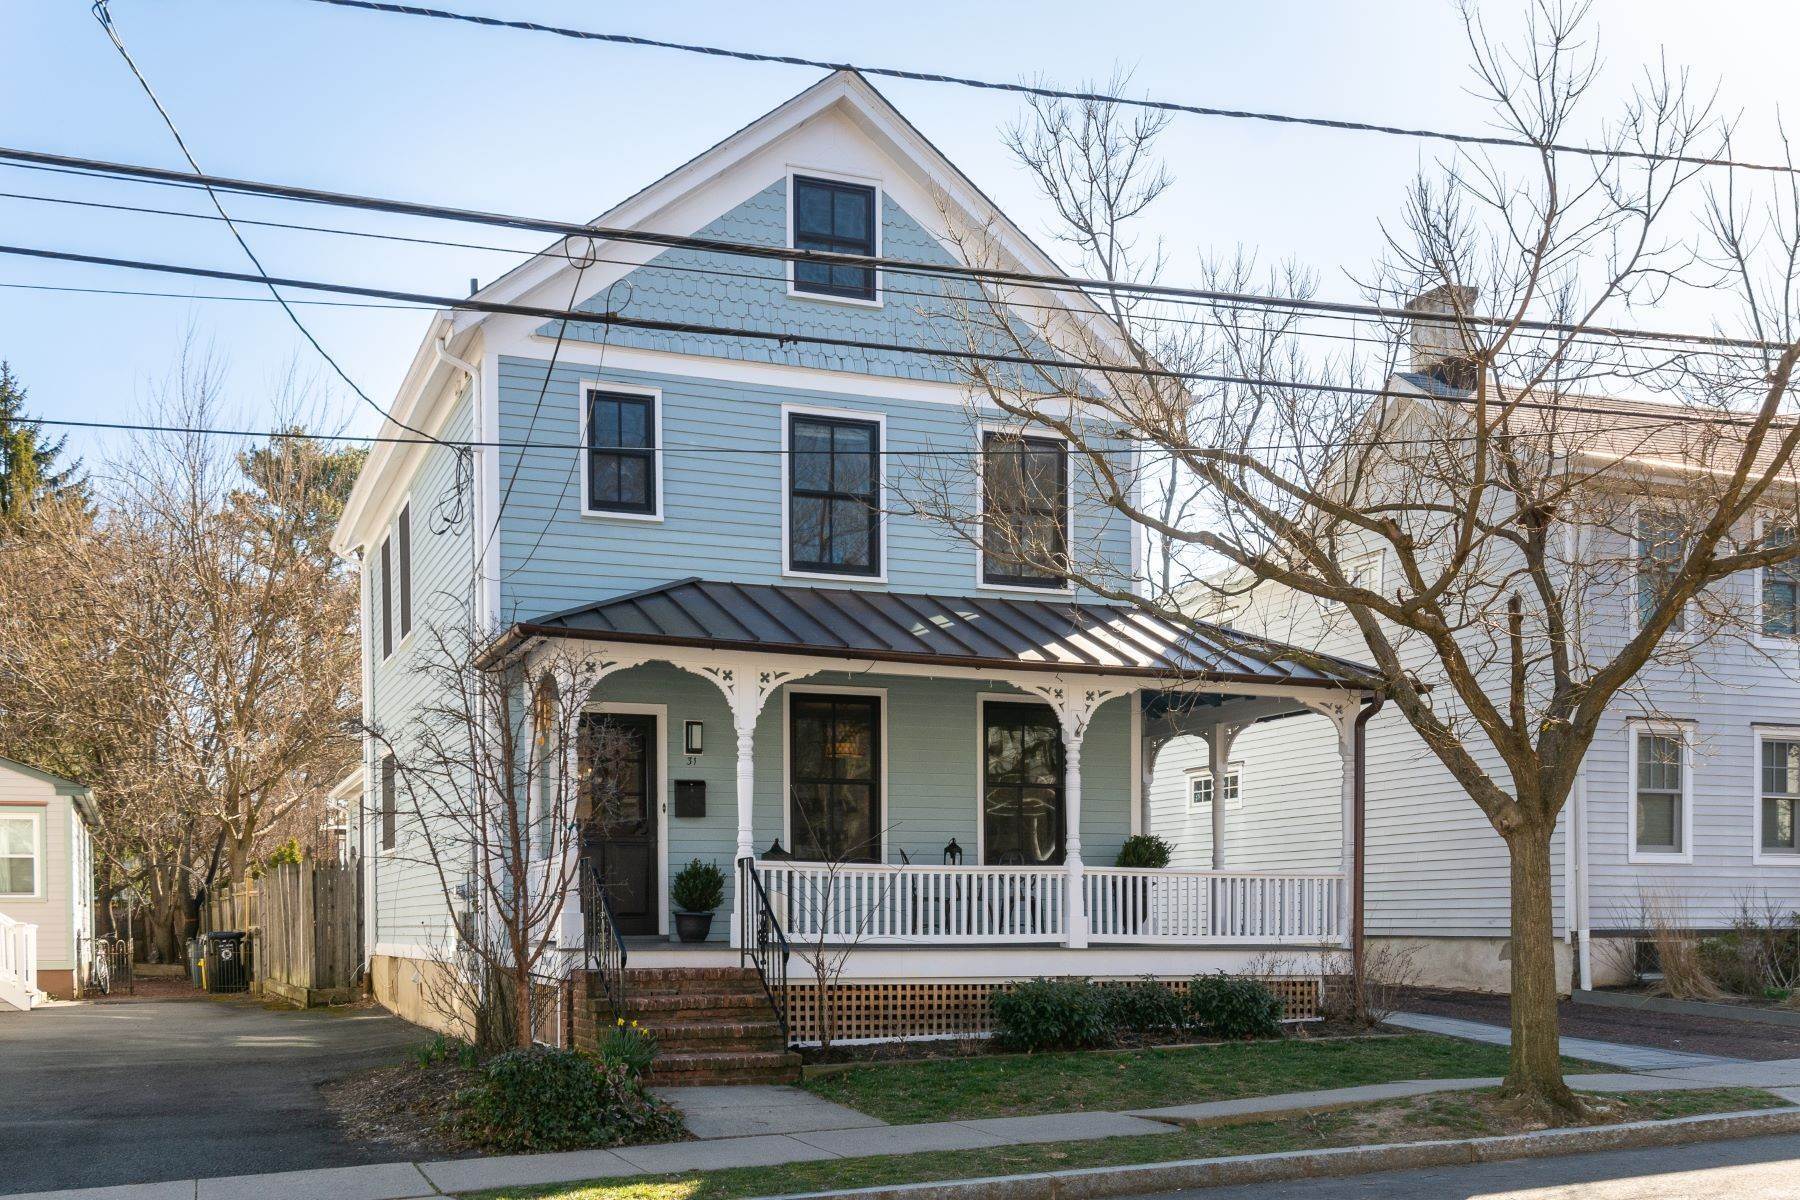 Single Family Homes for Sale at Beautifully Renovated with a Yard Beyond Compare 31 Chestnut Street, Princeton, New Jersey 08542 United States